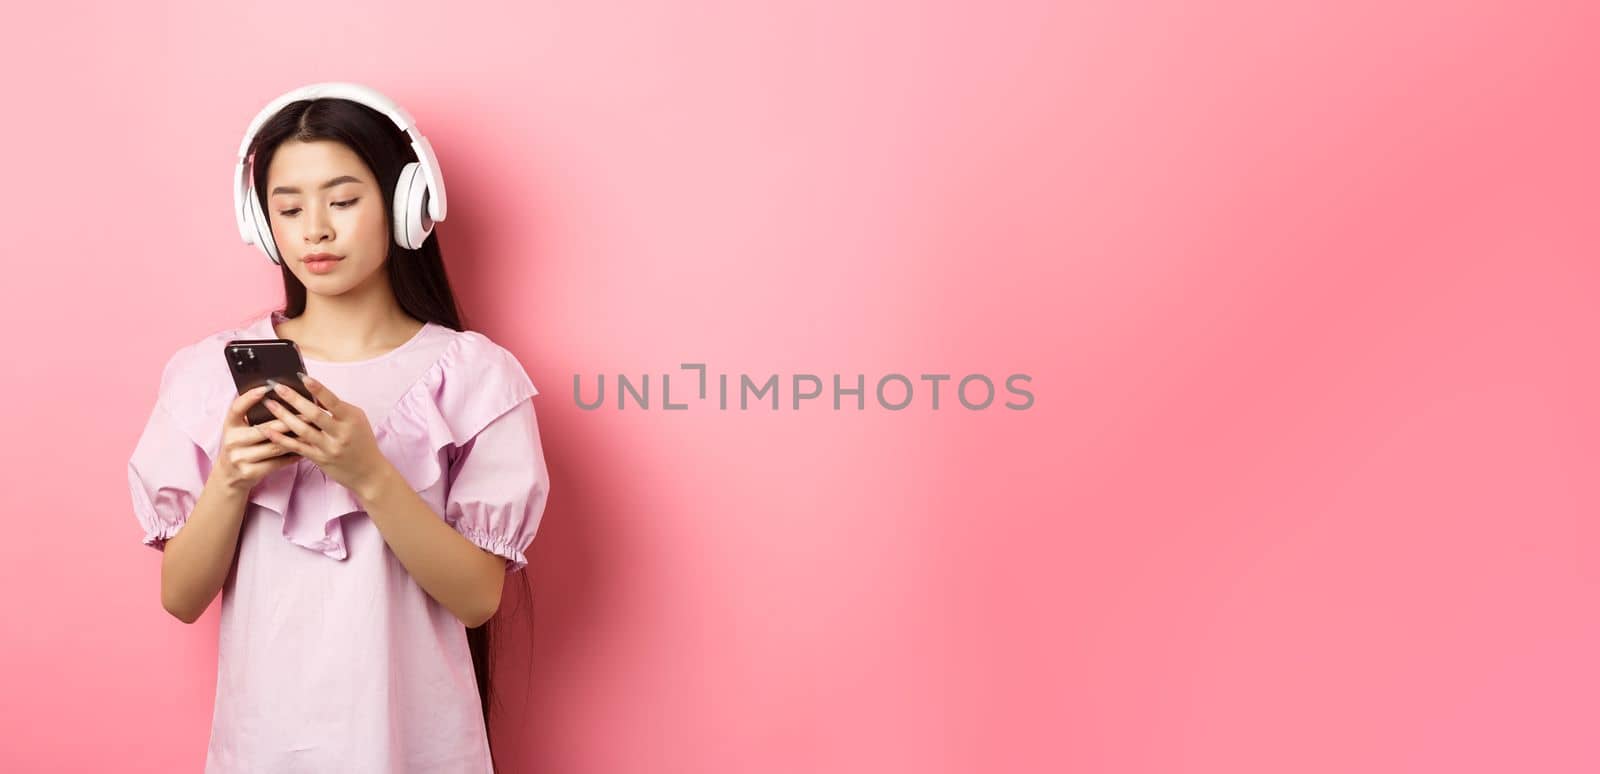 Young girl listening music in headphones and chatting on mobile phone, standing in dress against pink background.